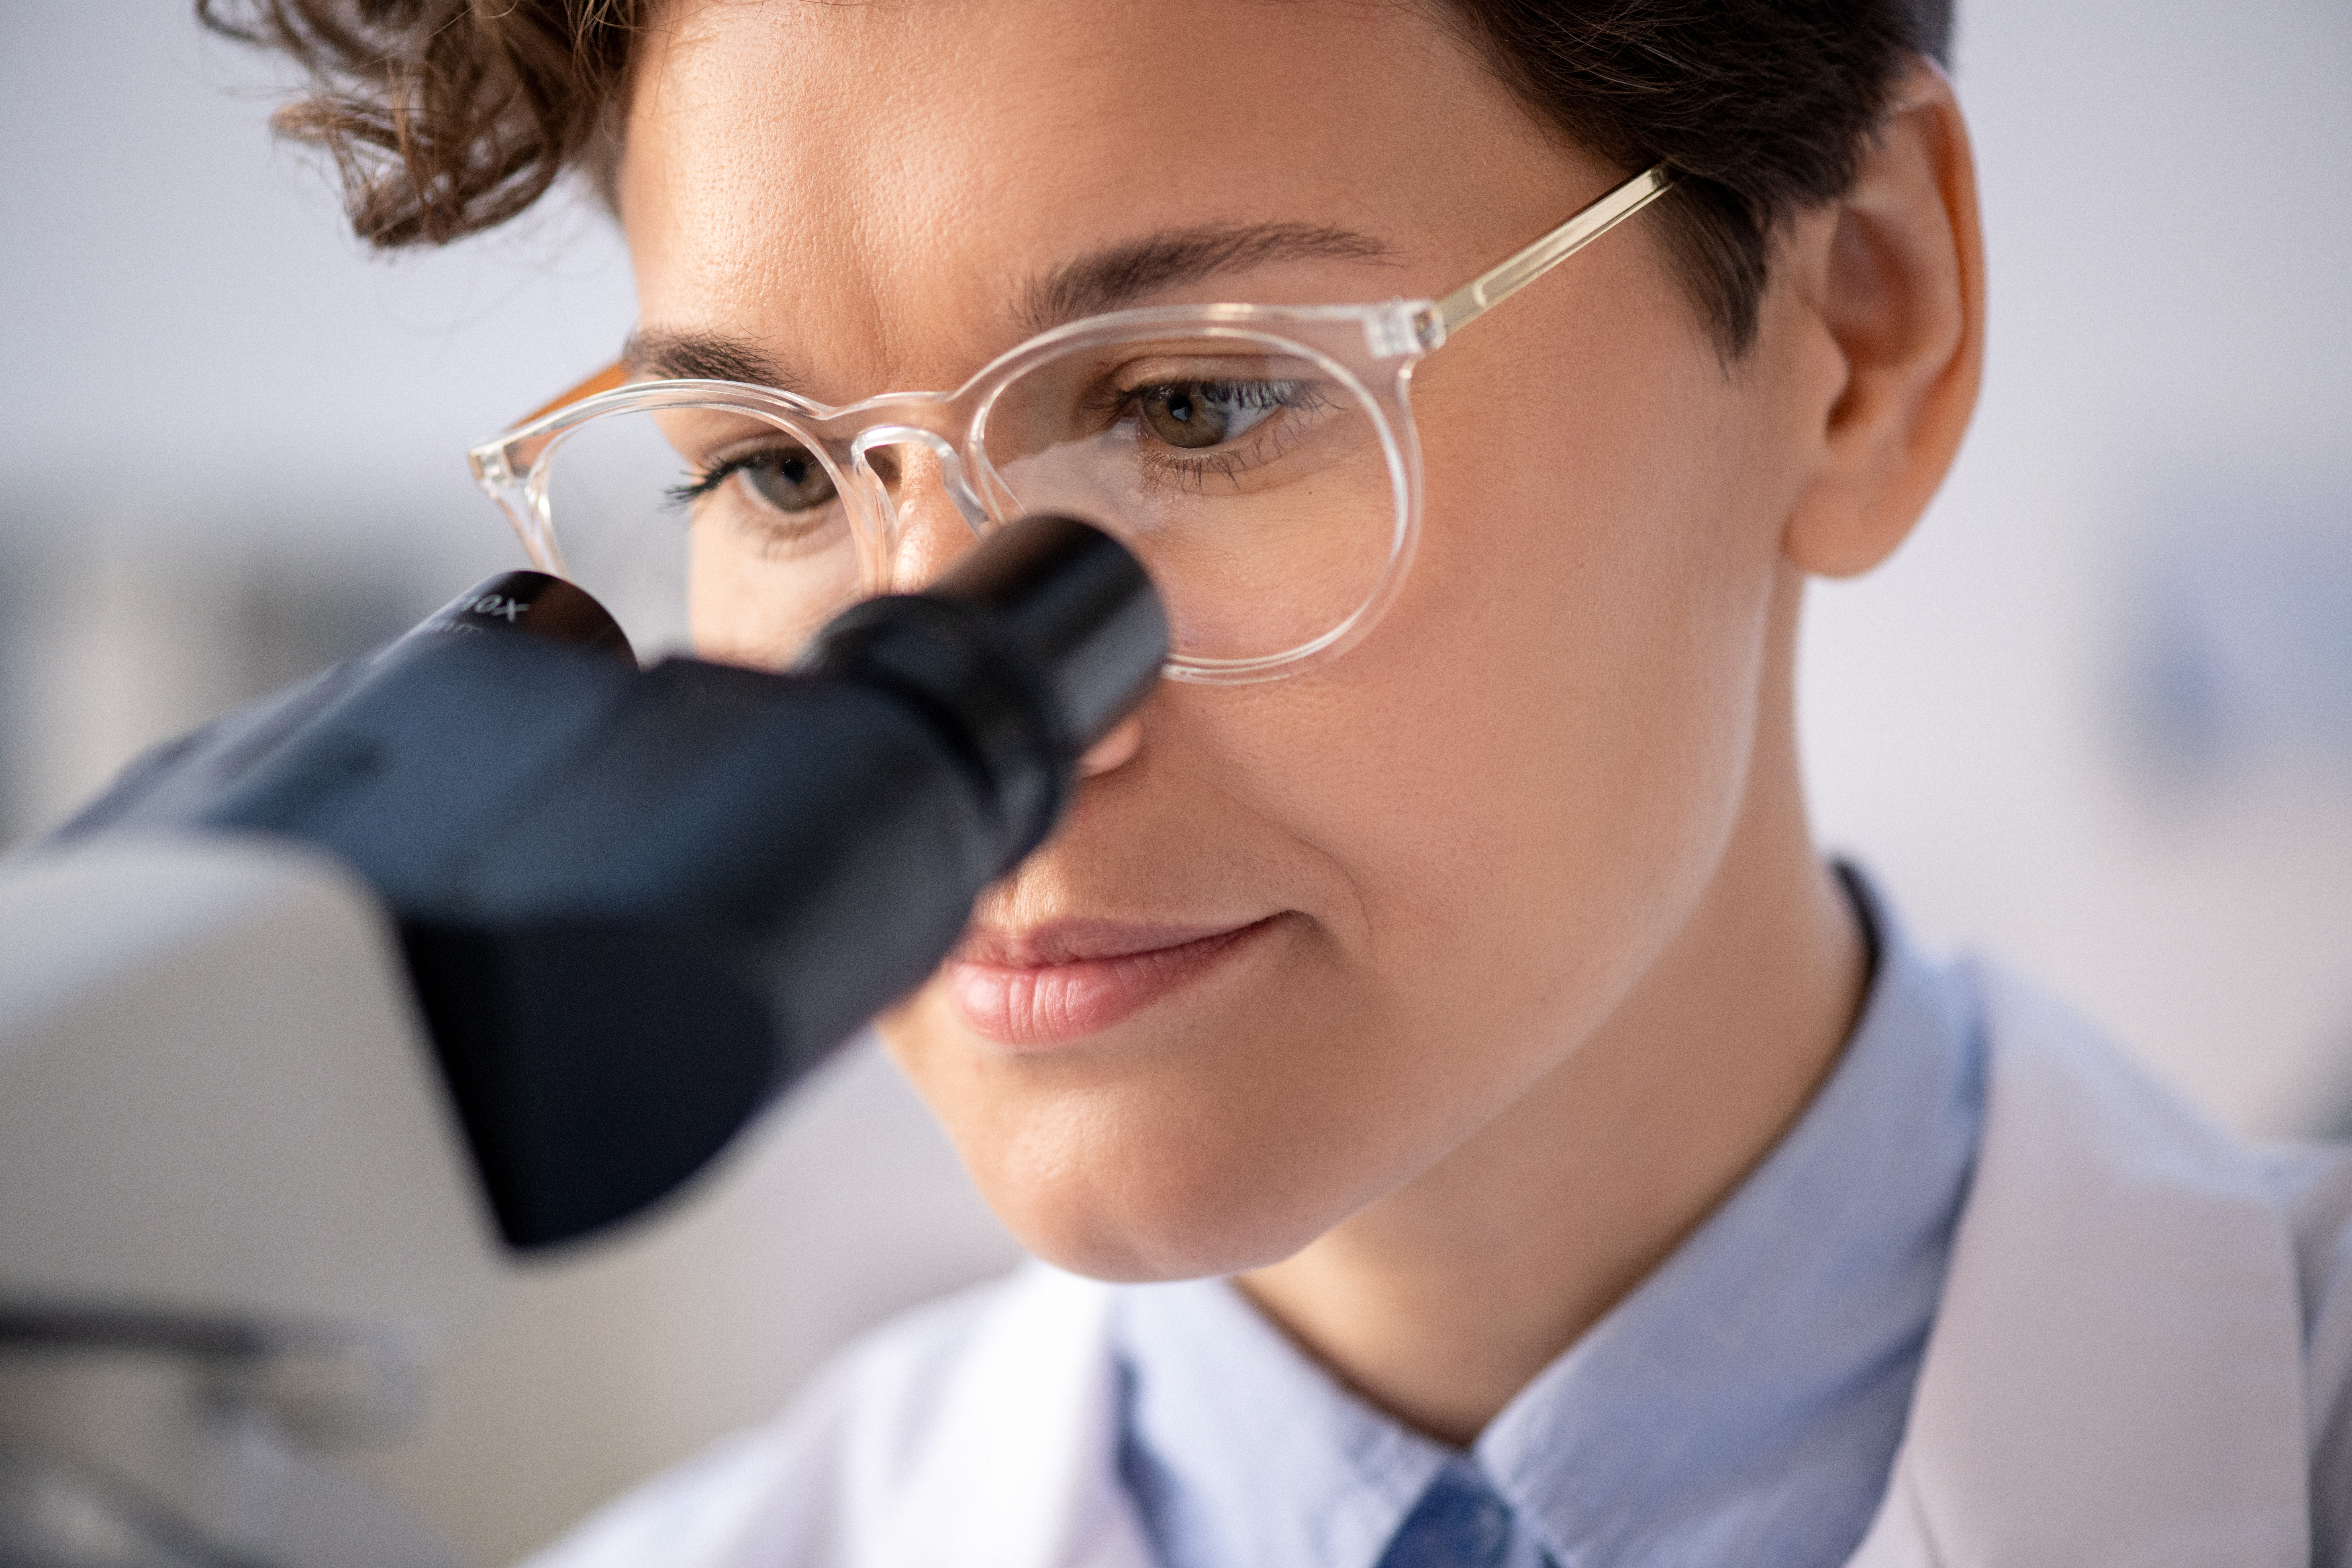 A scientist in eyeglasses and whitecoat looking through a microscopy eyepiece (source:envato)